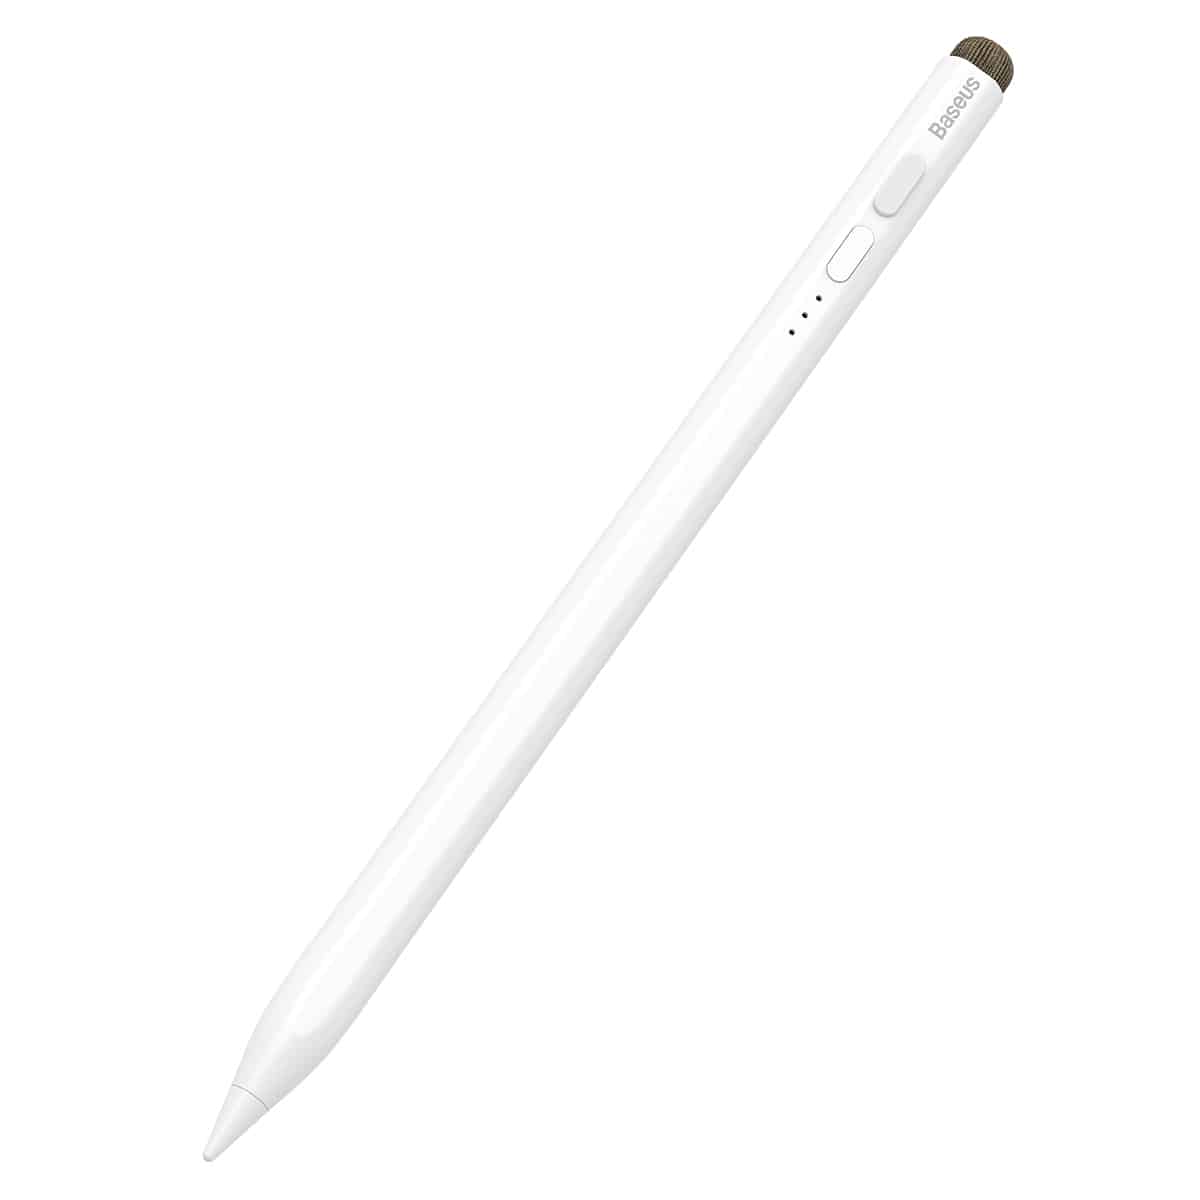 Baseus Pen Chang Light Display Capacitive Handwriting Pen (Active+Passive Version) White (Including: Simple Universal Data Cable Type-c 3A 0.3m White*1+Active Head*1+Passive Head Cap*1)